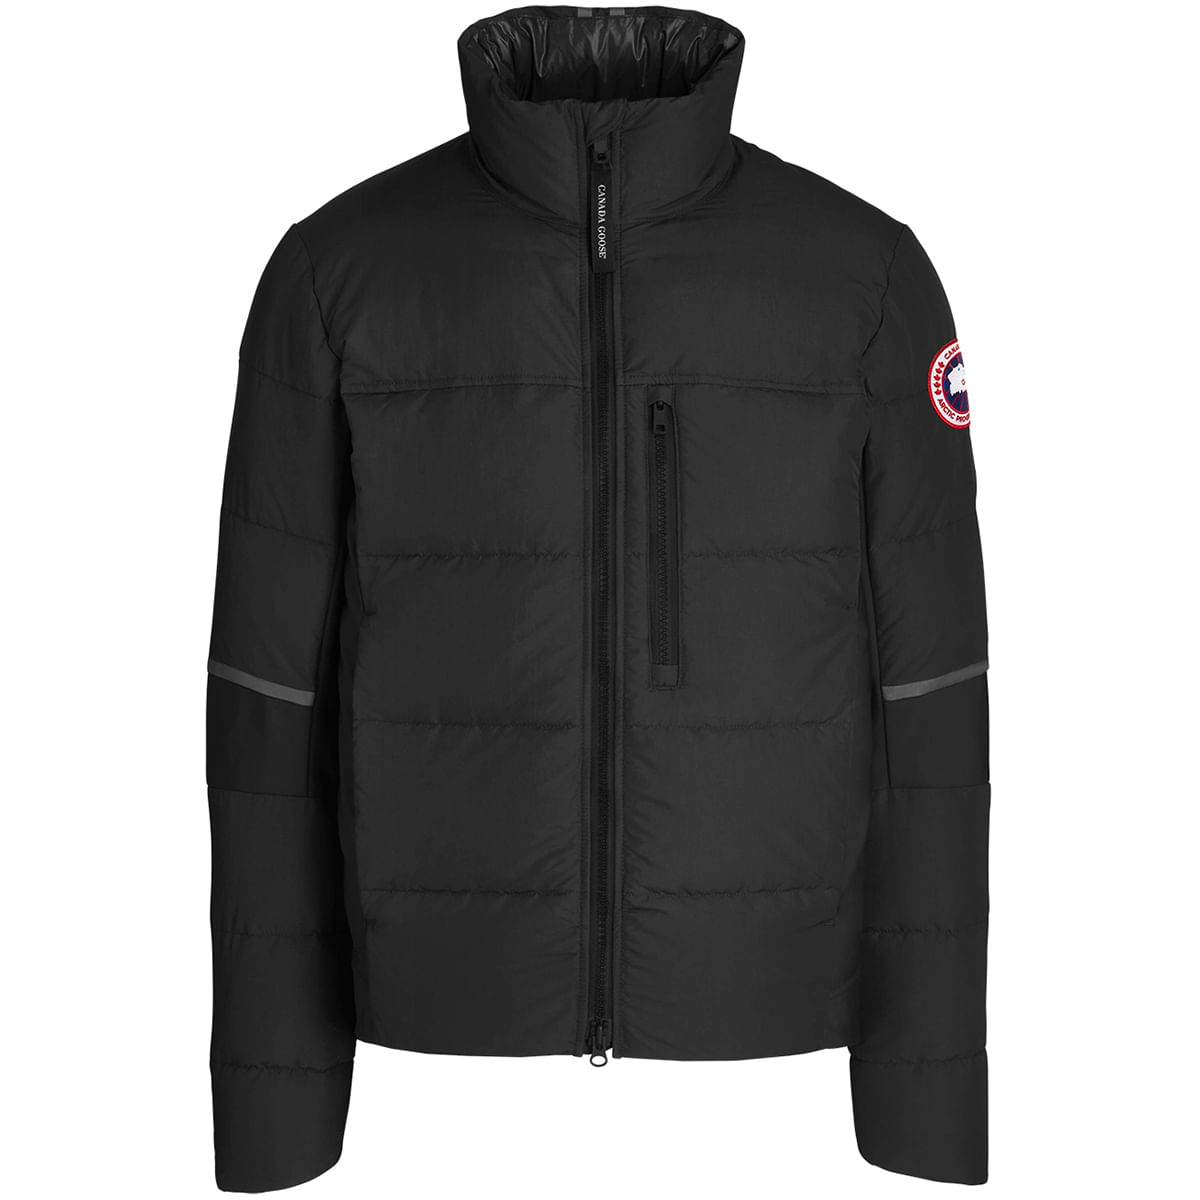 Canada Goose Mens HYBRIDGE JACKET BLACK - Ski Jackets and Gear, Winter  Coats, Running, Tennis, Soccer, and more from Top Brands - Paragon Sports